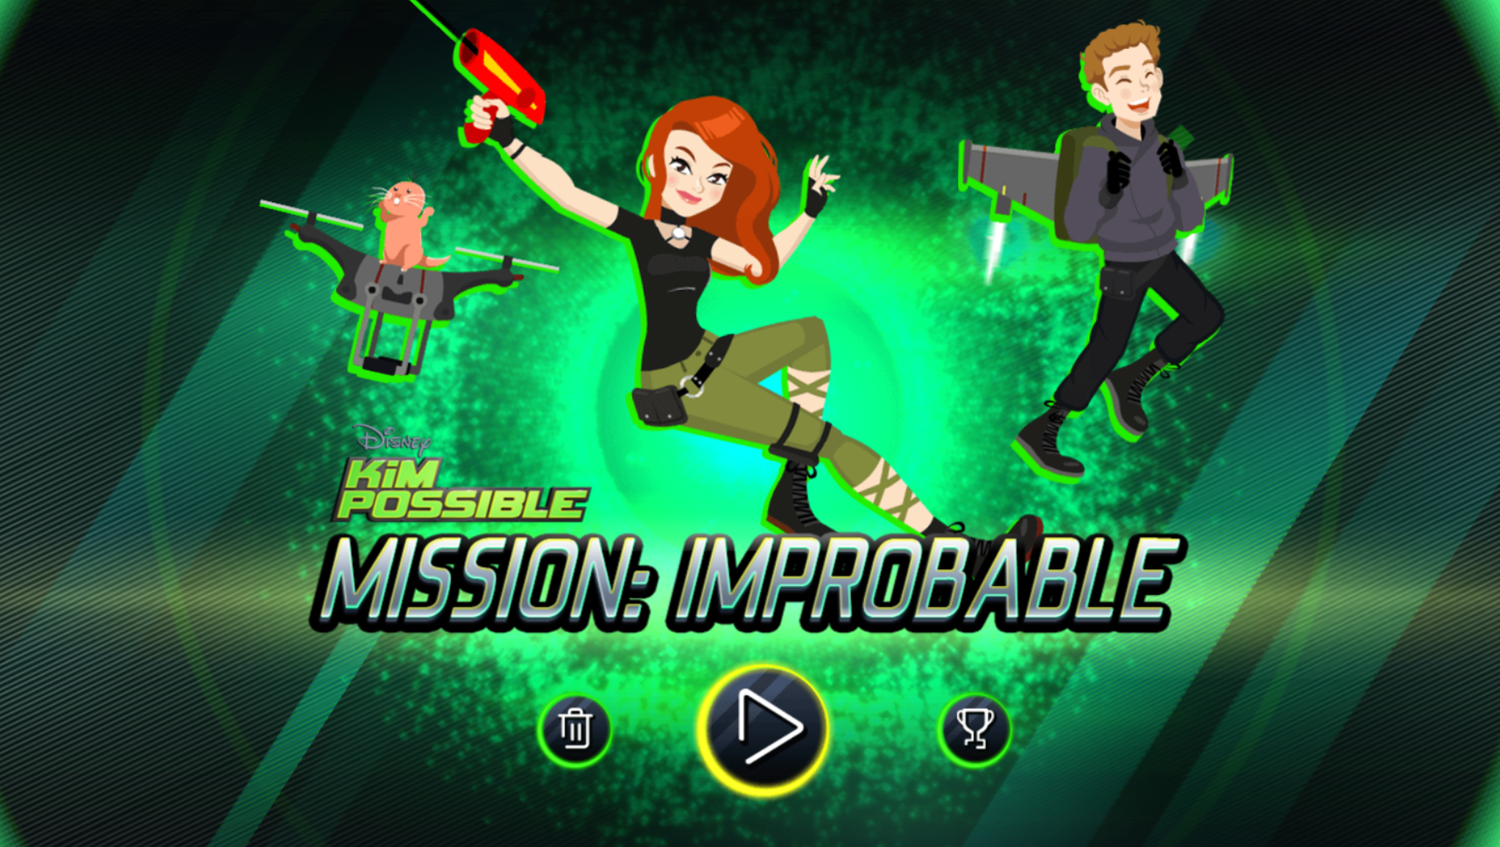 Kim Possible Mission Improbable Game Welcome Screen Screenshot.